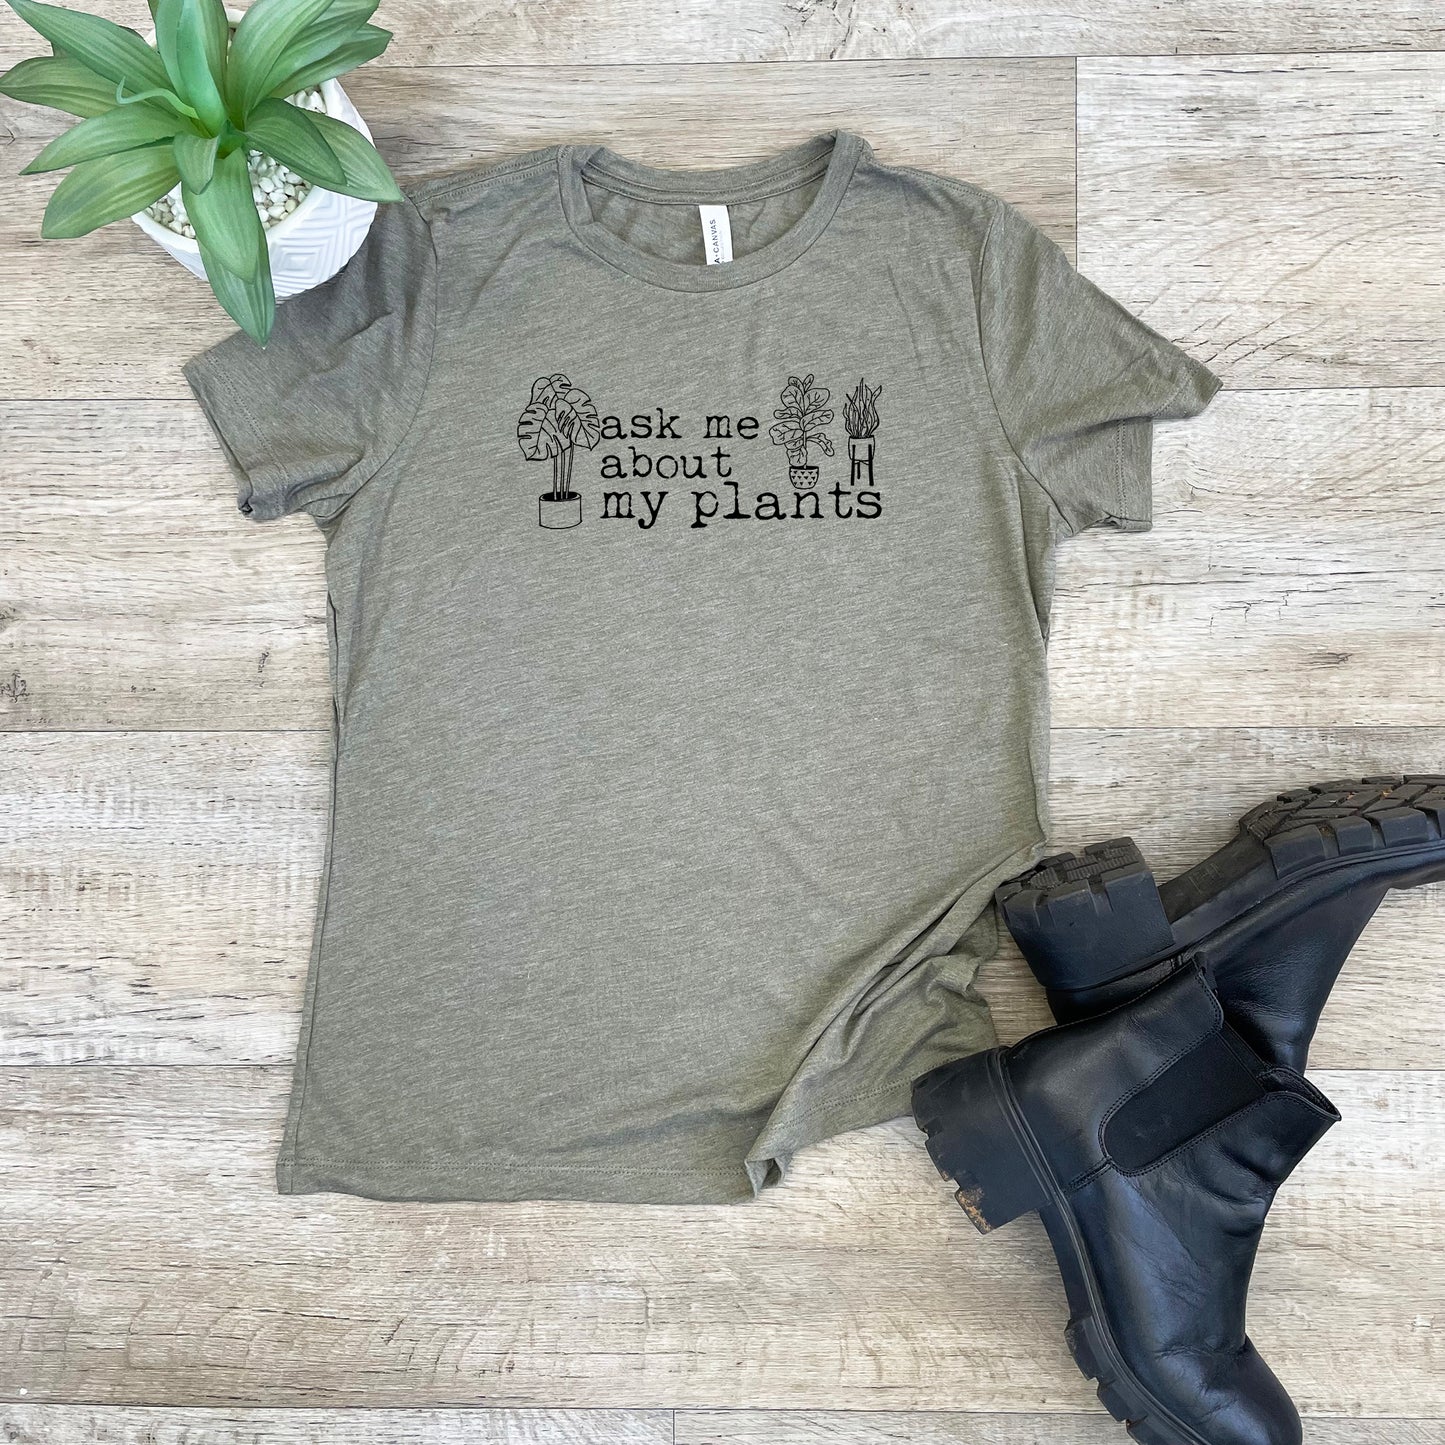 a t - shirt that says tell me about my plants